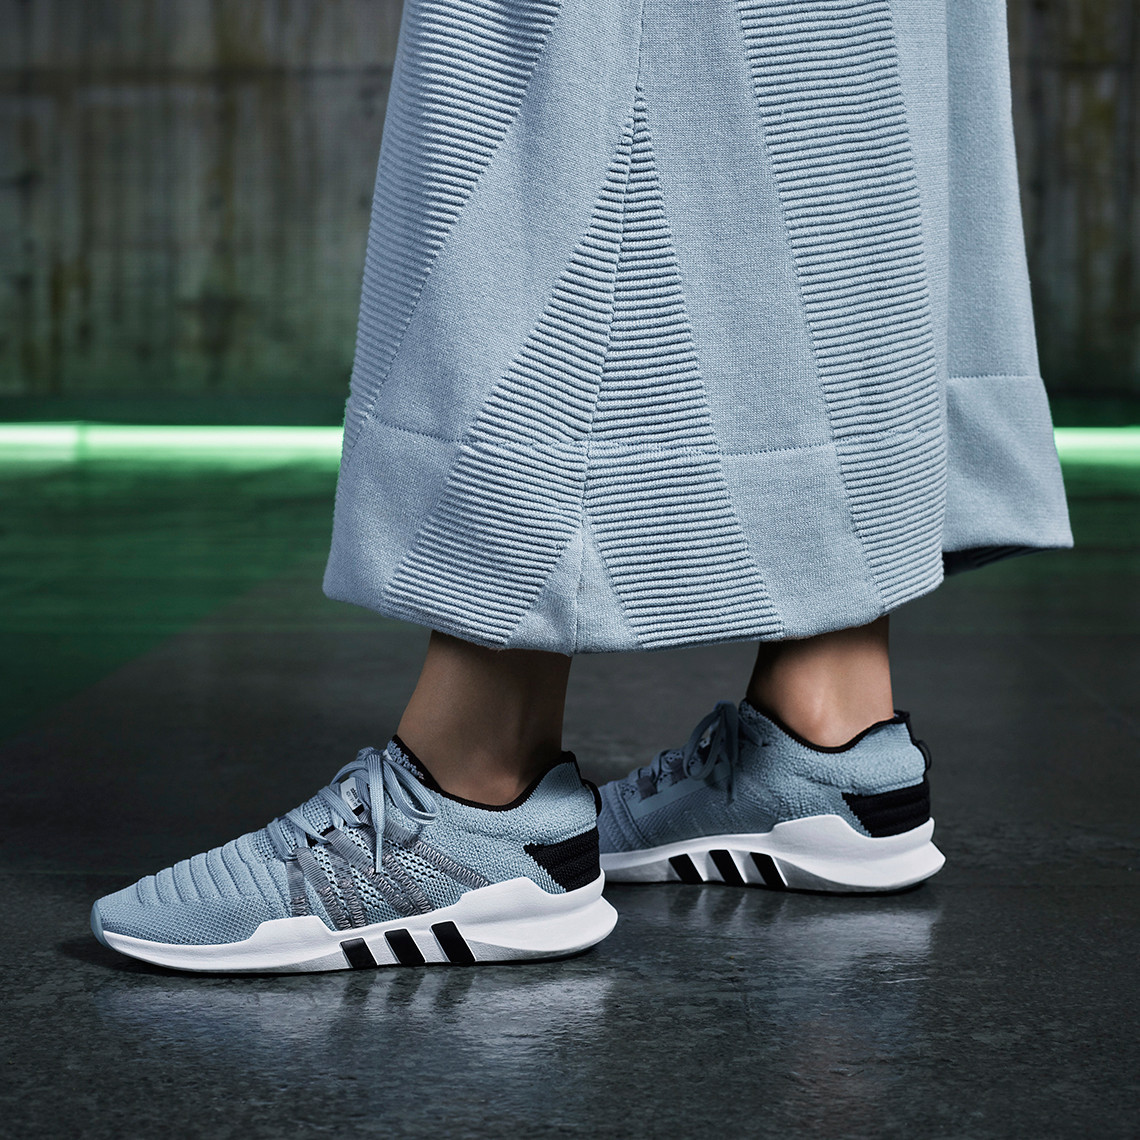 Adidas Releases Two New EQT ADV Sneaker Silhouettes